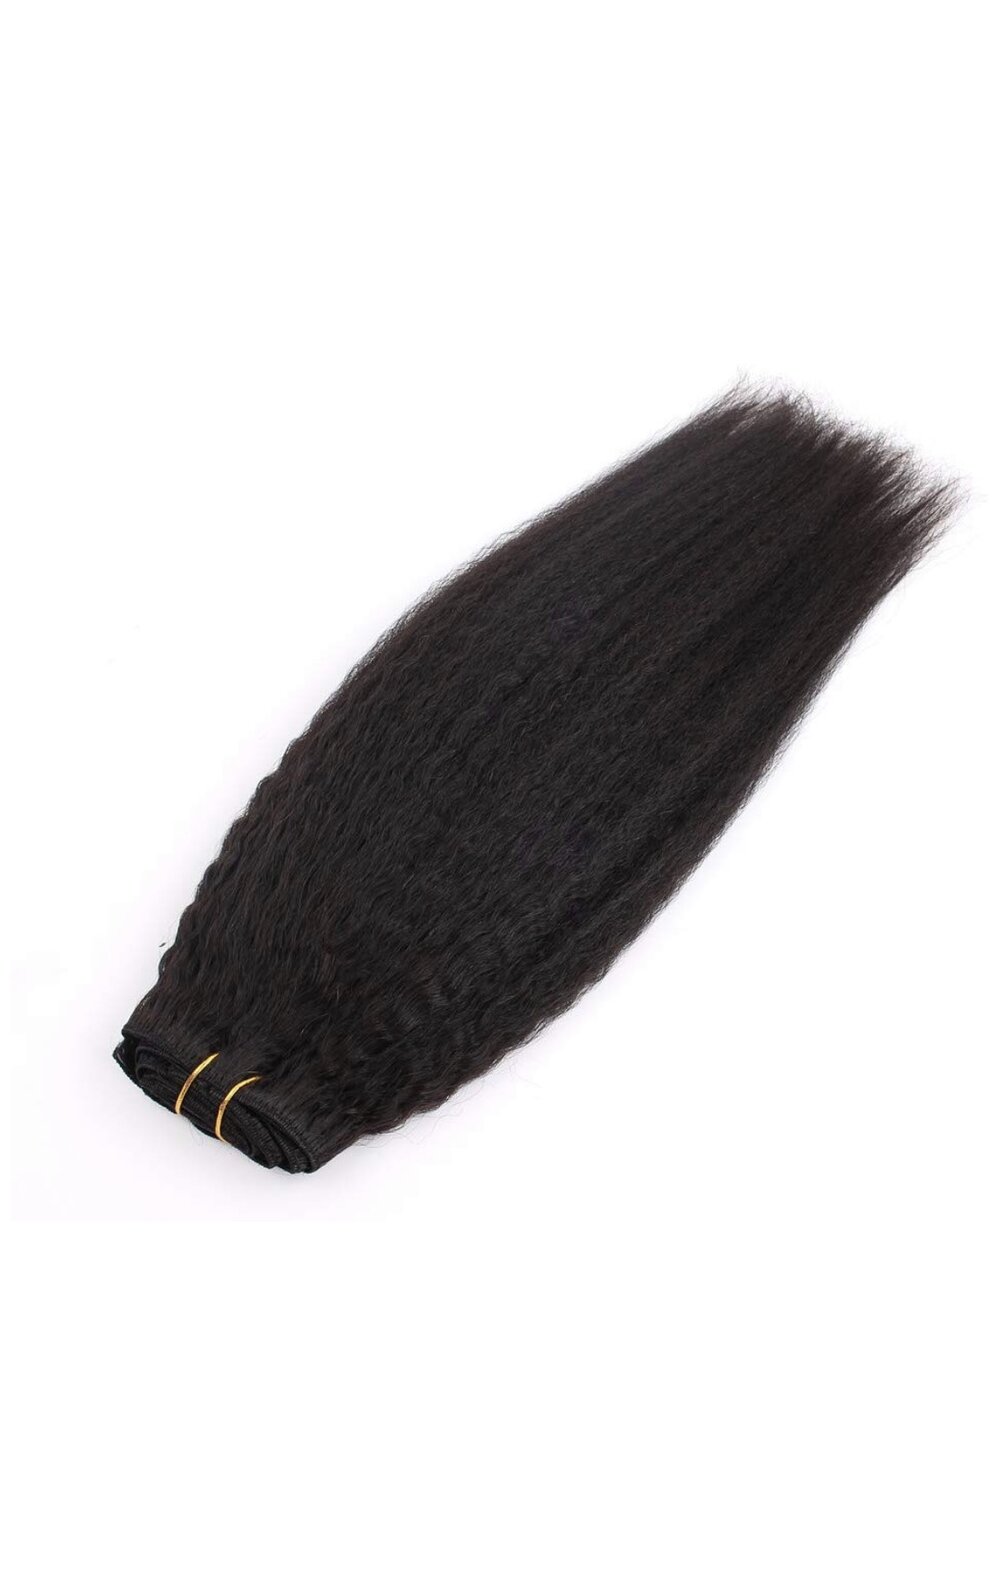 Headband with Straight Hair Extensions for Women Girls (Black)